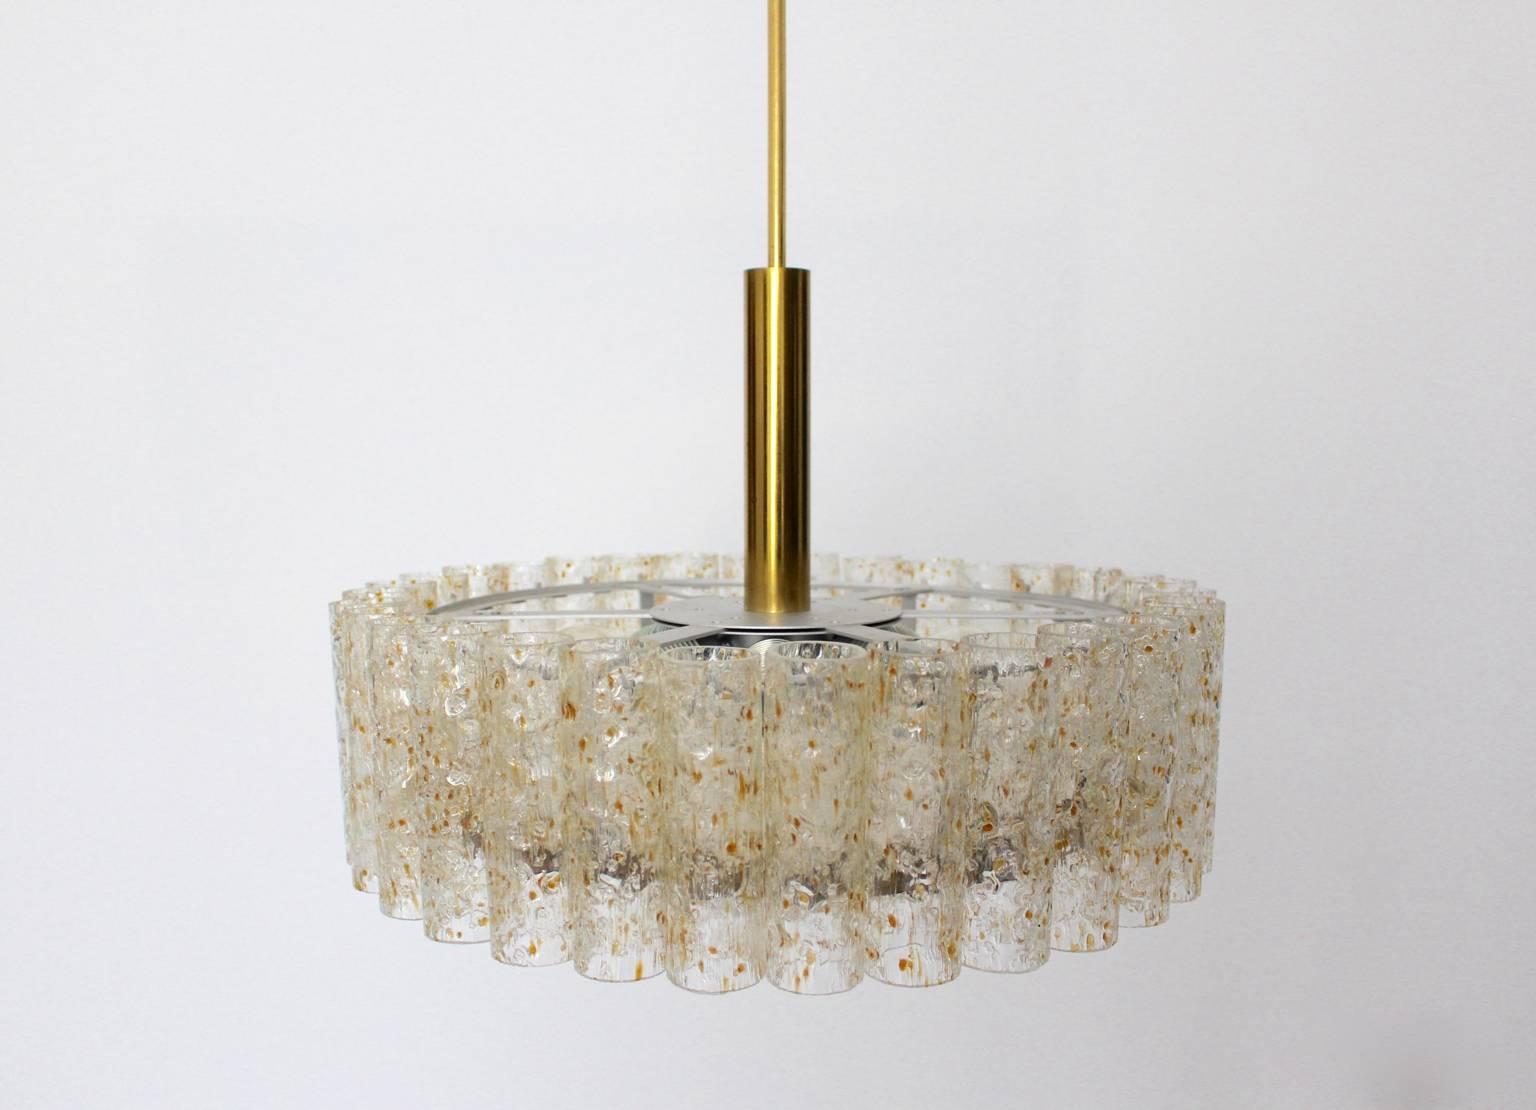 Mid century modern vintage textured glass chandelier or pendant,  which features 32 pieces of textured glass tubes and lights with six E 27 bulbs.The metal frame was silver enameled.
The chandelier was designed and manufactured by Doria Leuchten,